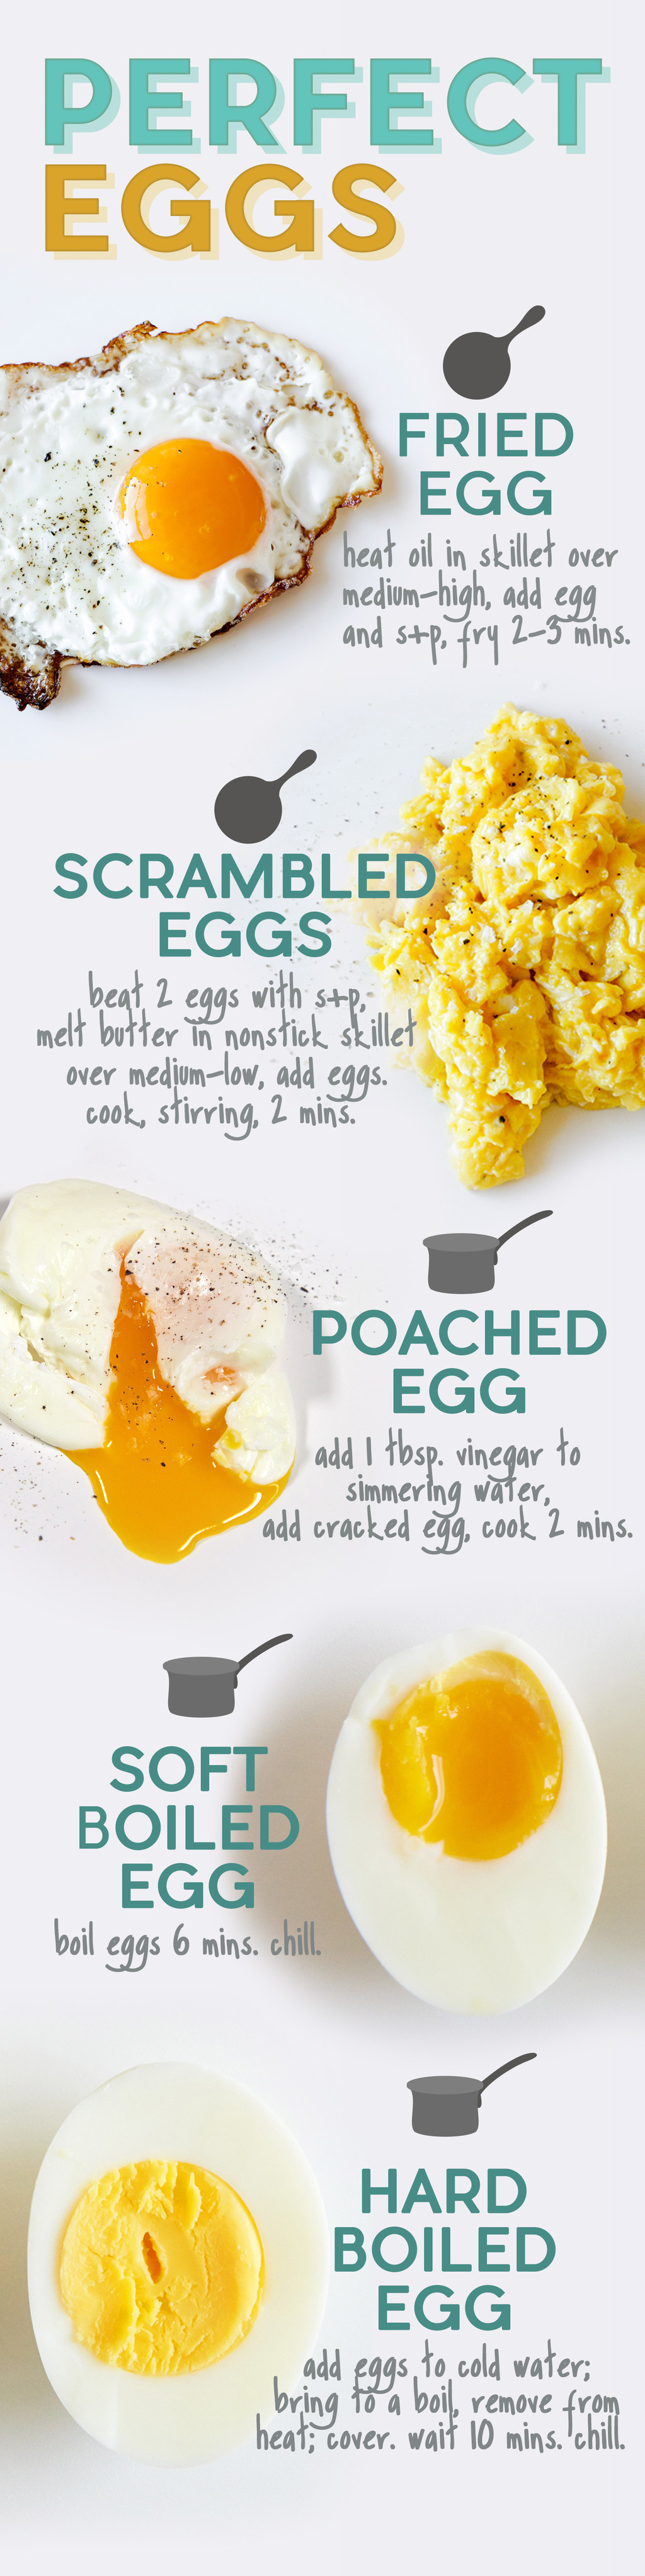 Poached Eggs Time Chart